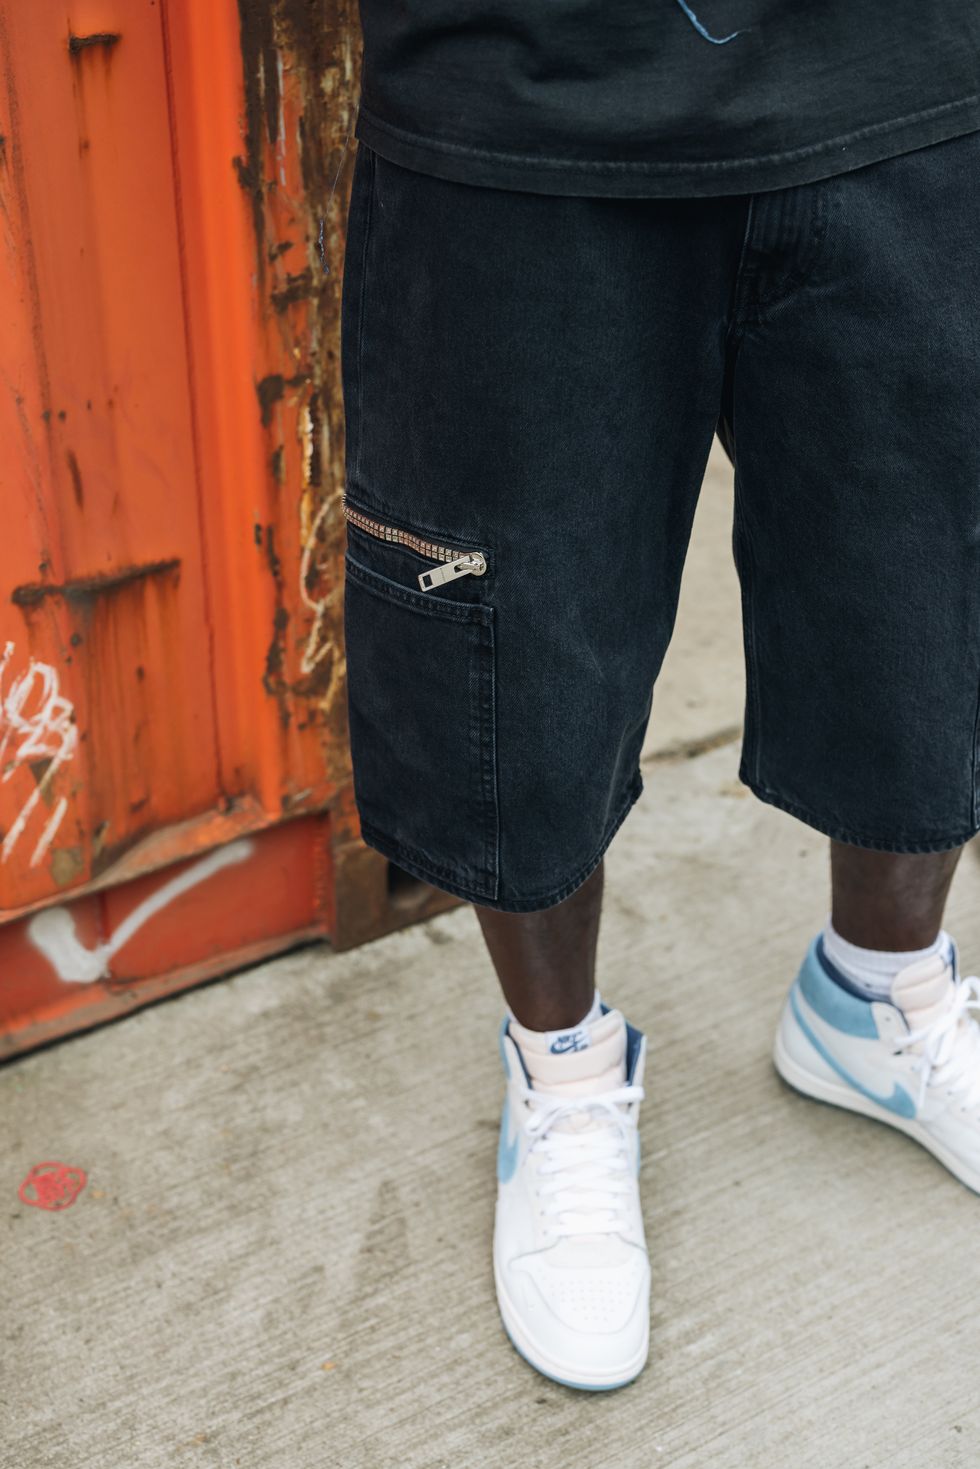 Five Fits With: Nigel Sylvester, BMX Legend and Style Maestro